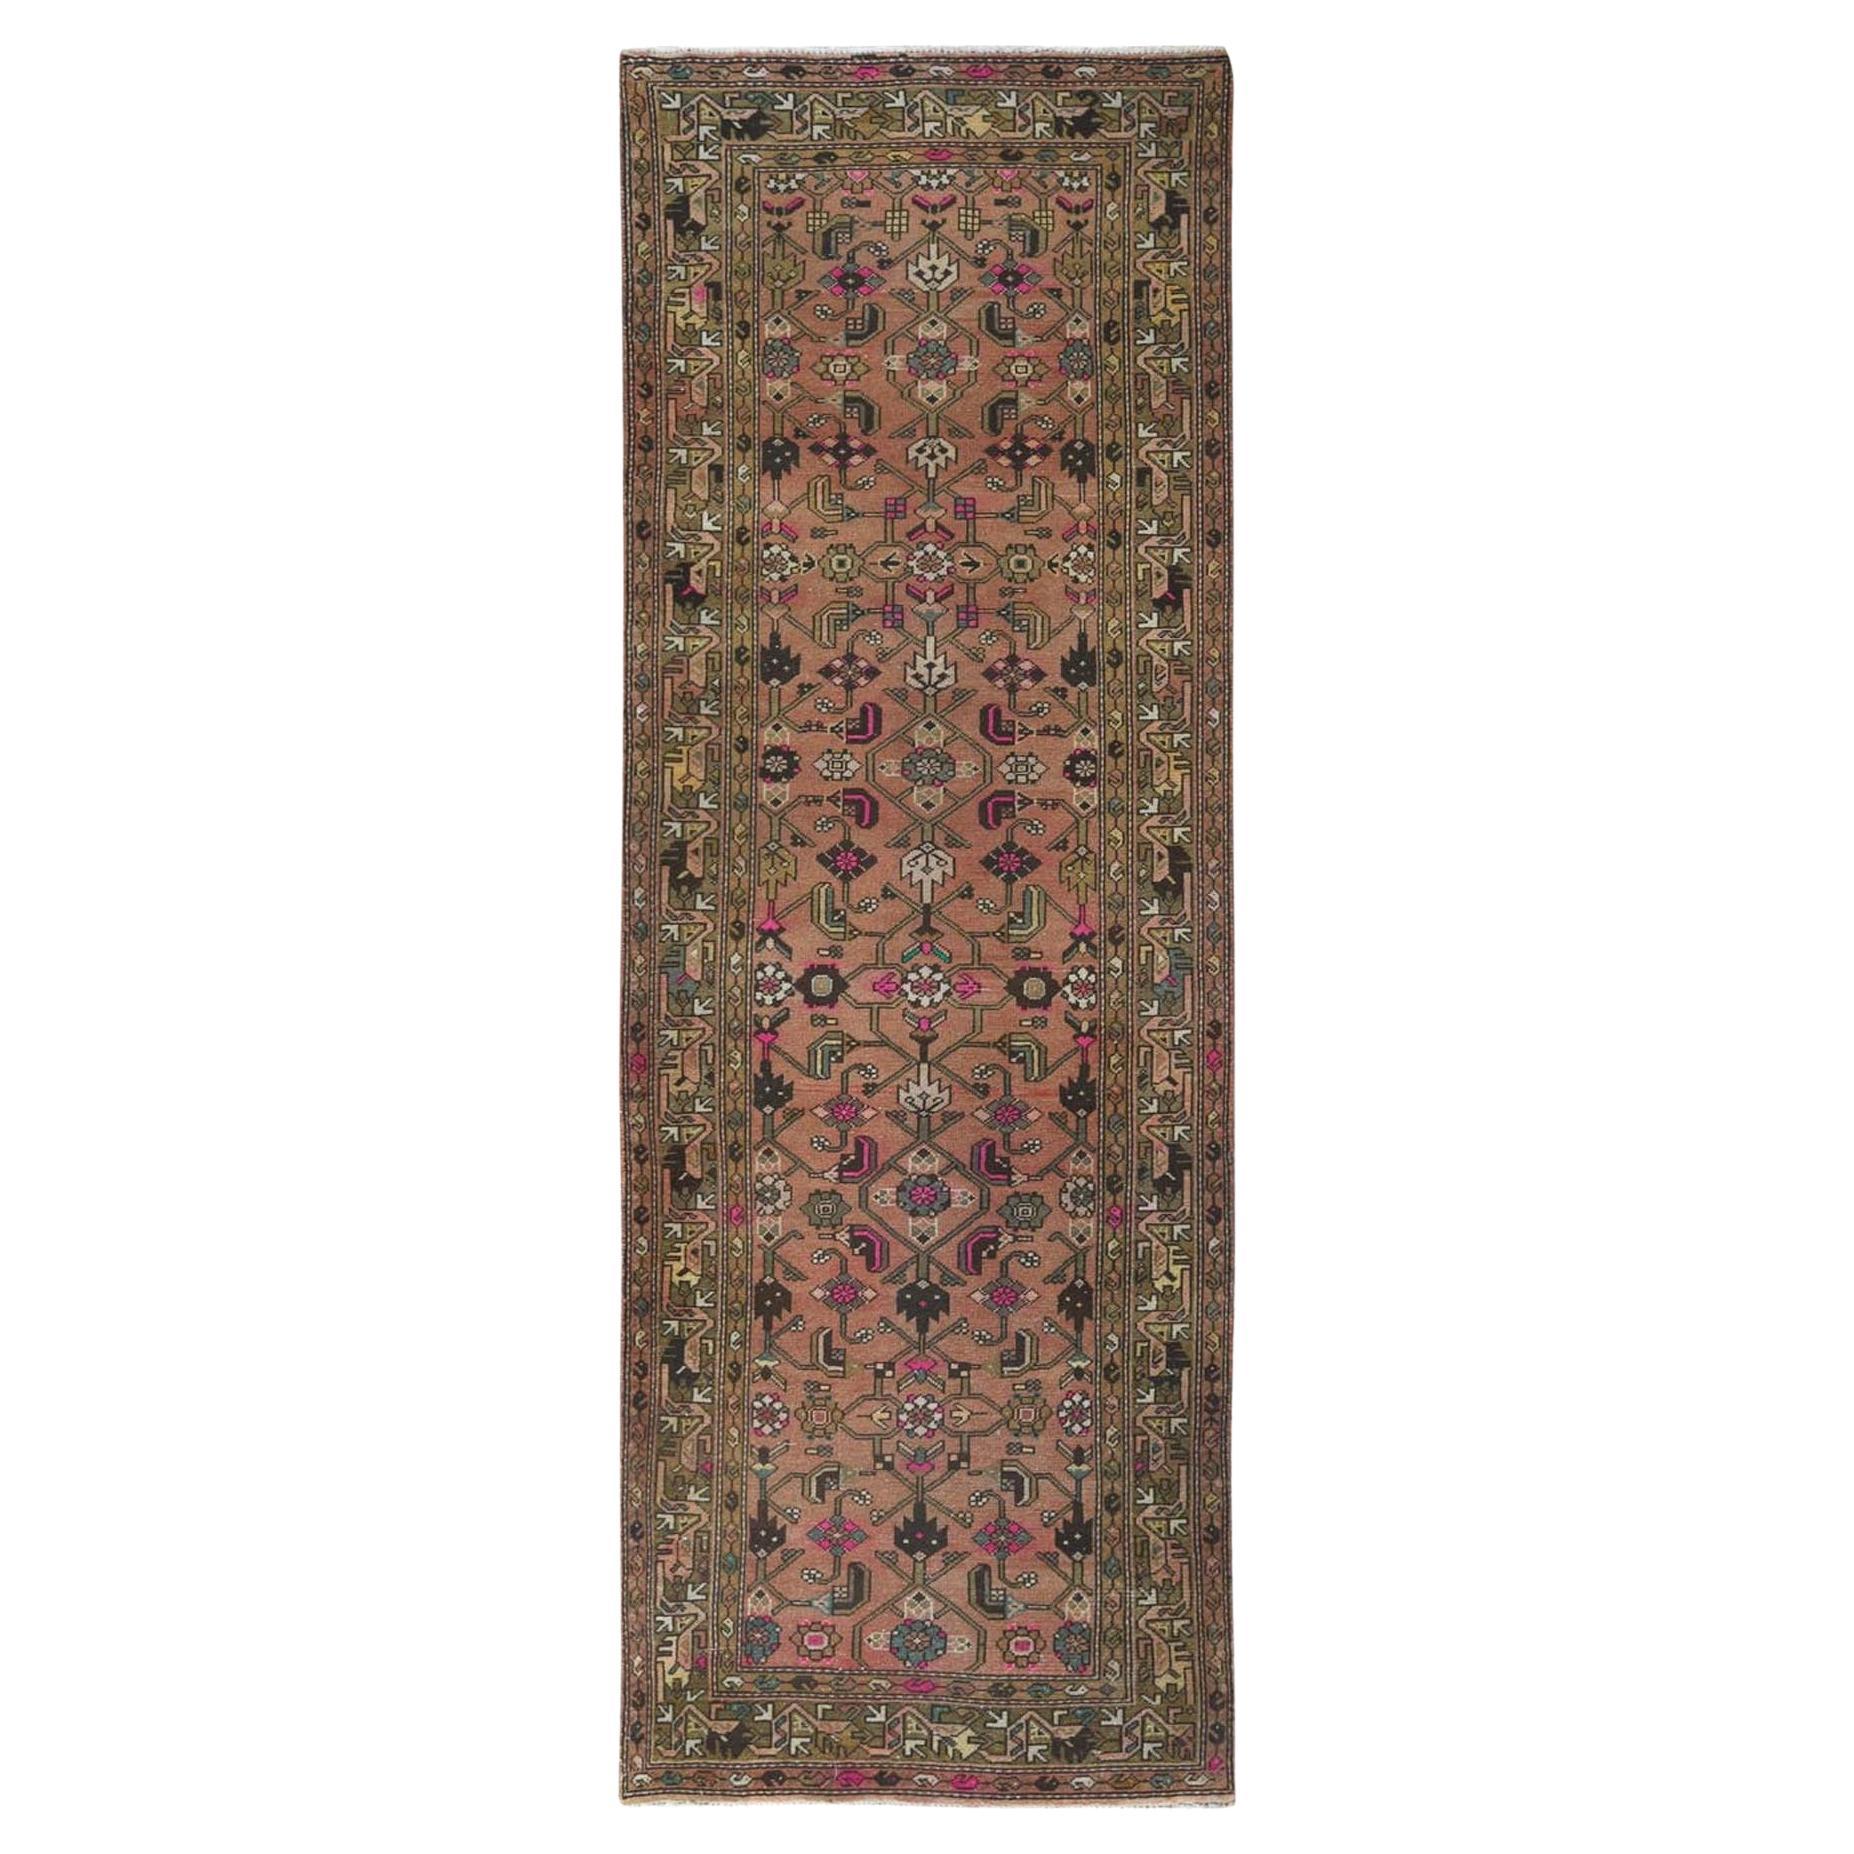 Apricot Color, Touches of Hot Pink Vintage Persian Hamadan Wool Hand Knotted Rug